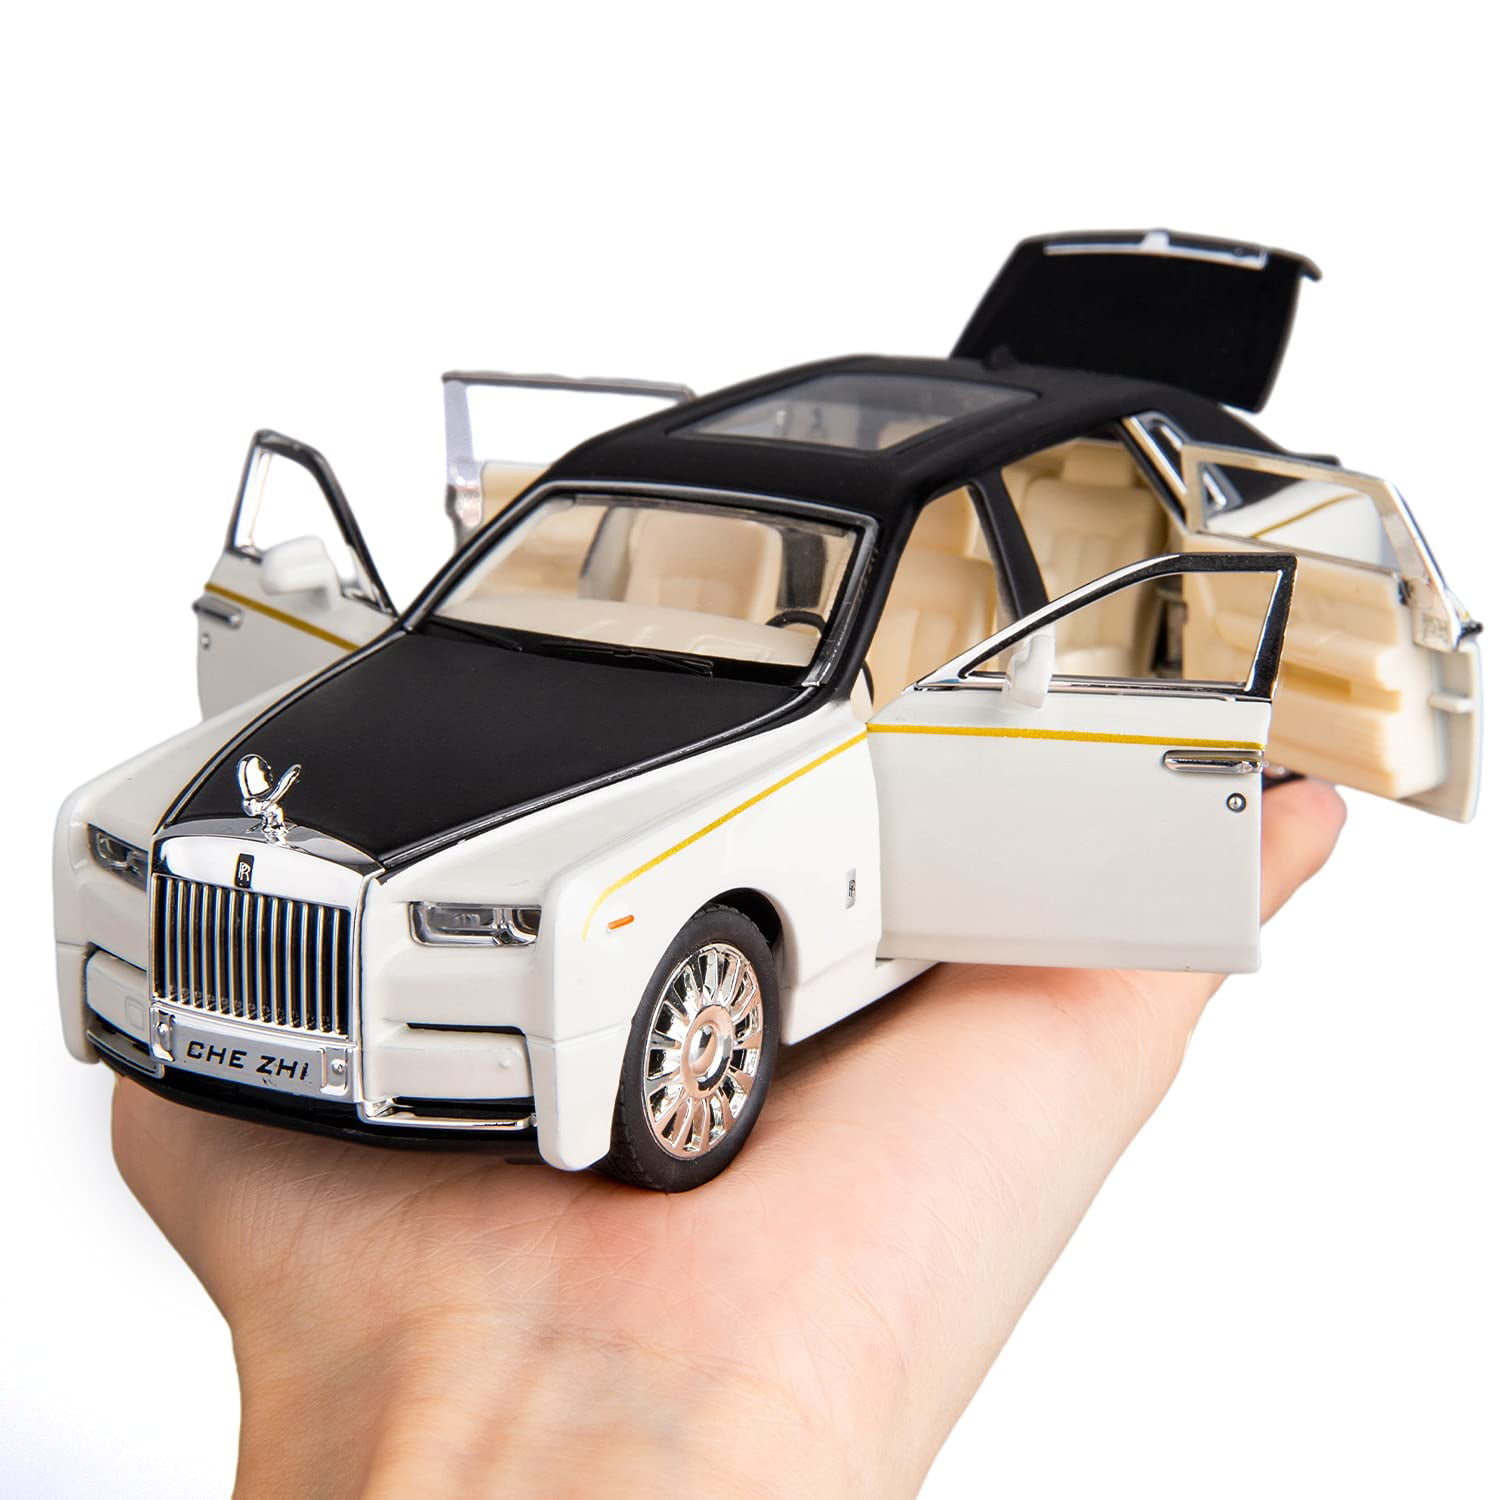 SG Ready StockKids Electric Car Rolls Royce Ride On Toy Car with Remote  ControlPremium Full Function VersionLarge Si  Shopee Singapore